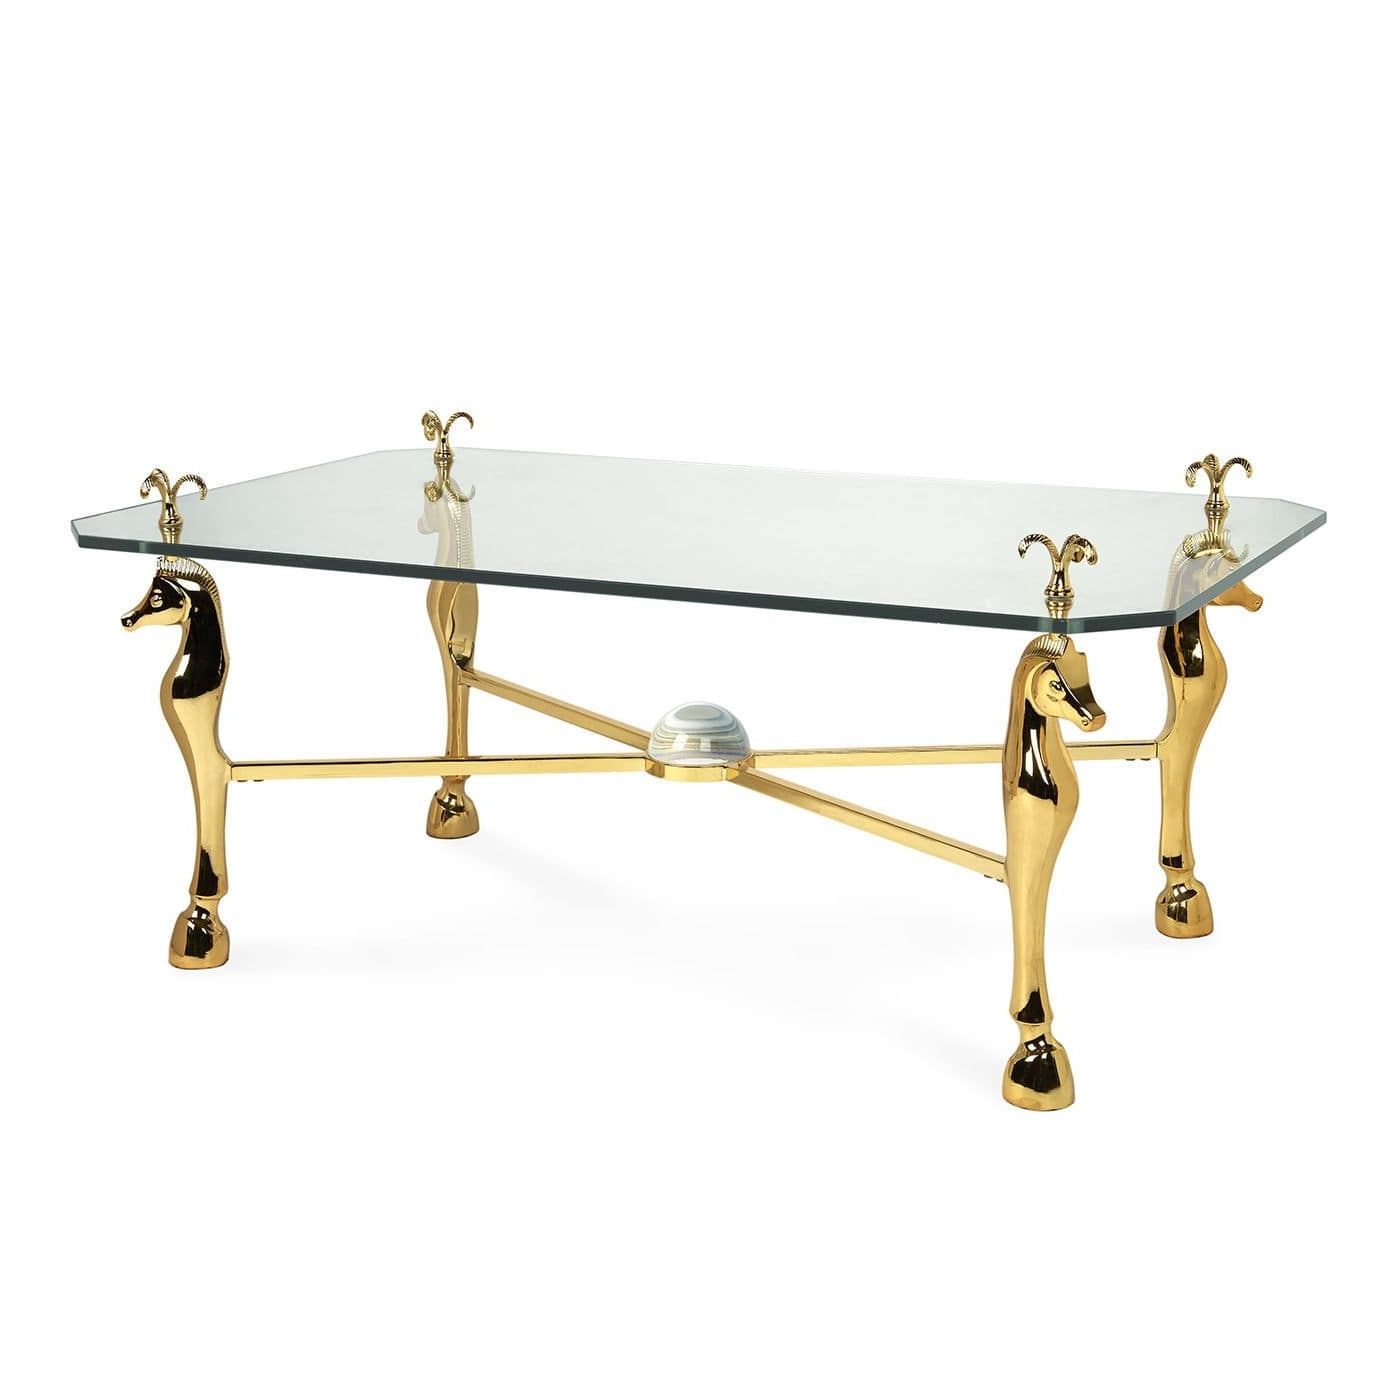 French Style Coffee Table / Tempered Glass / Polished Brass Inside Widely Used Acrylic Glass And Brass Coffee Tables (Gallery 12 of 20)